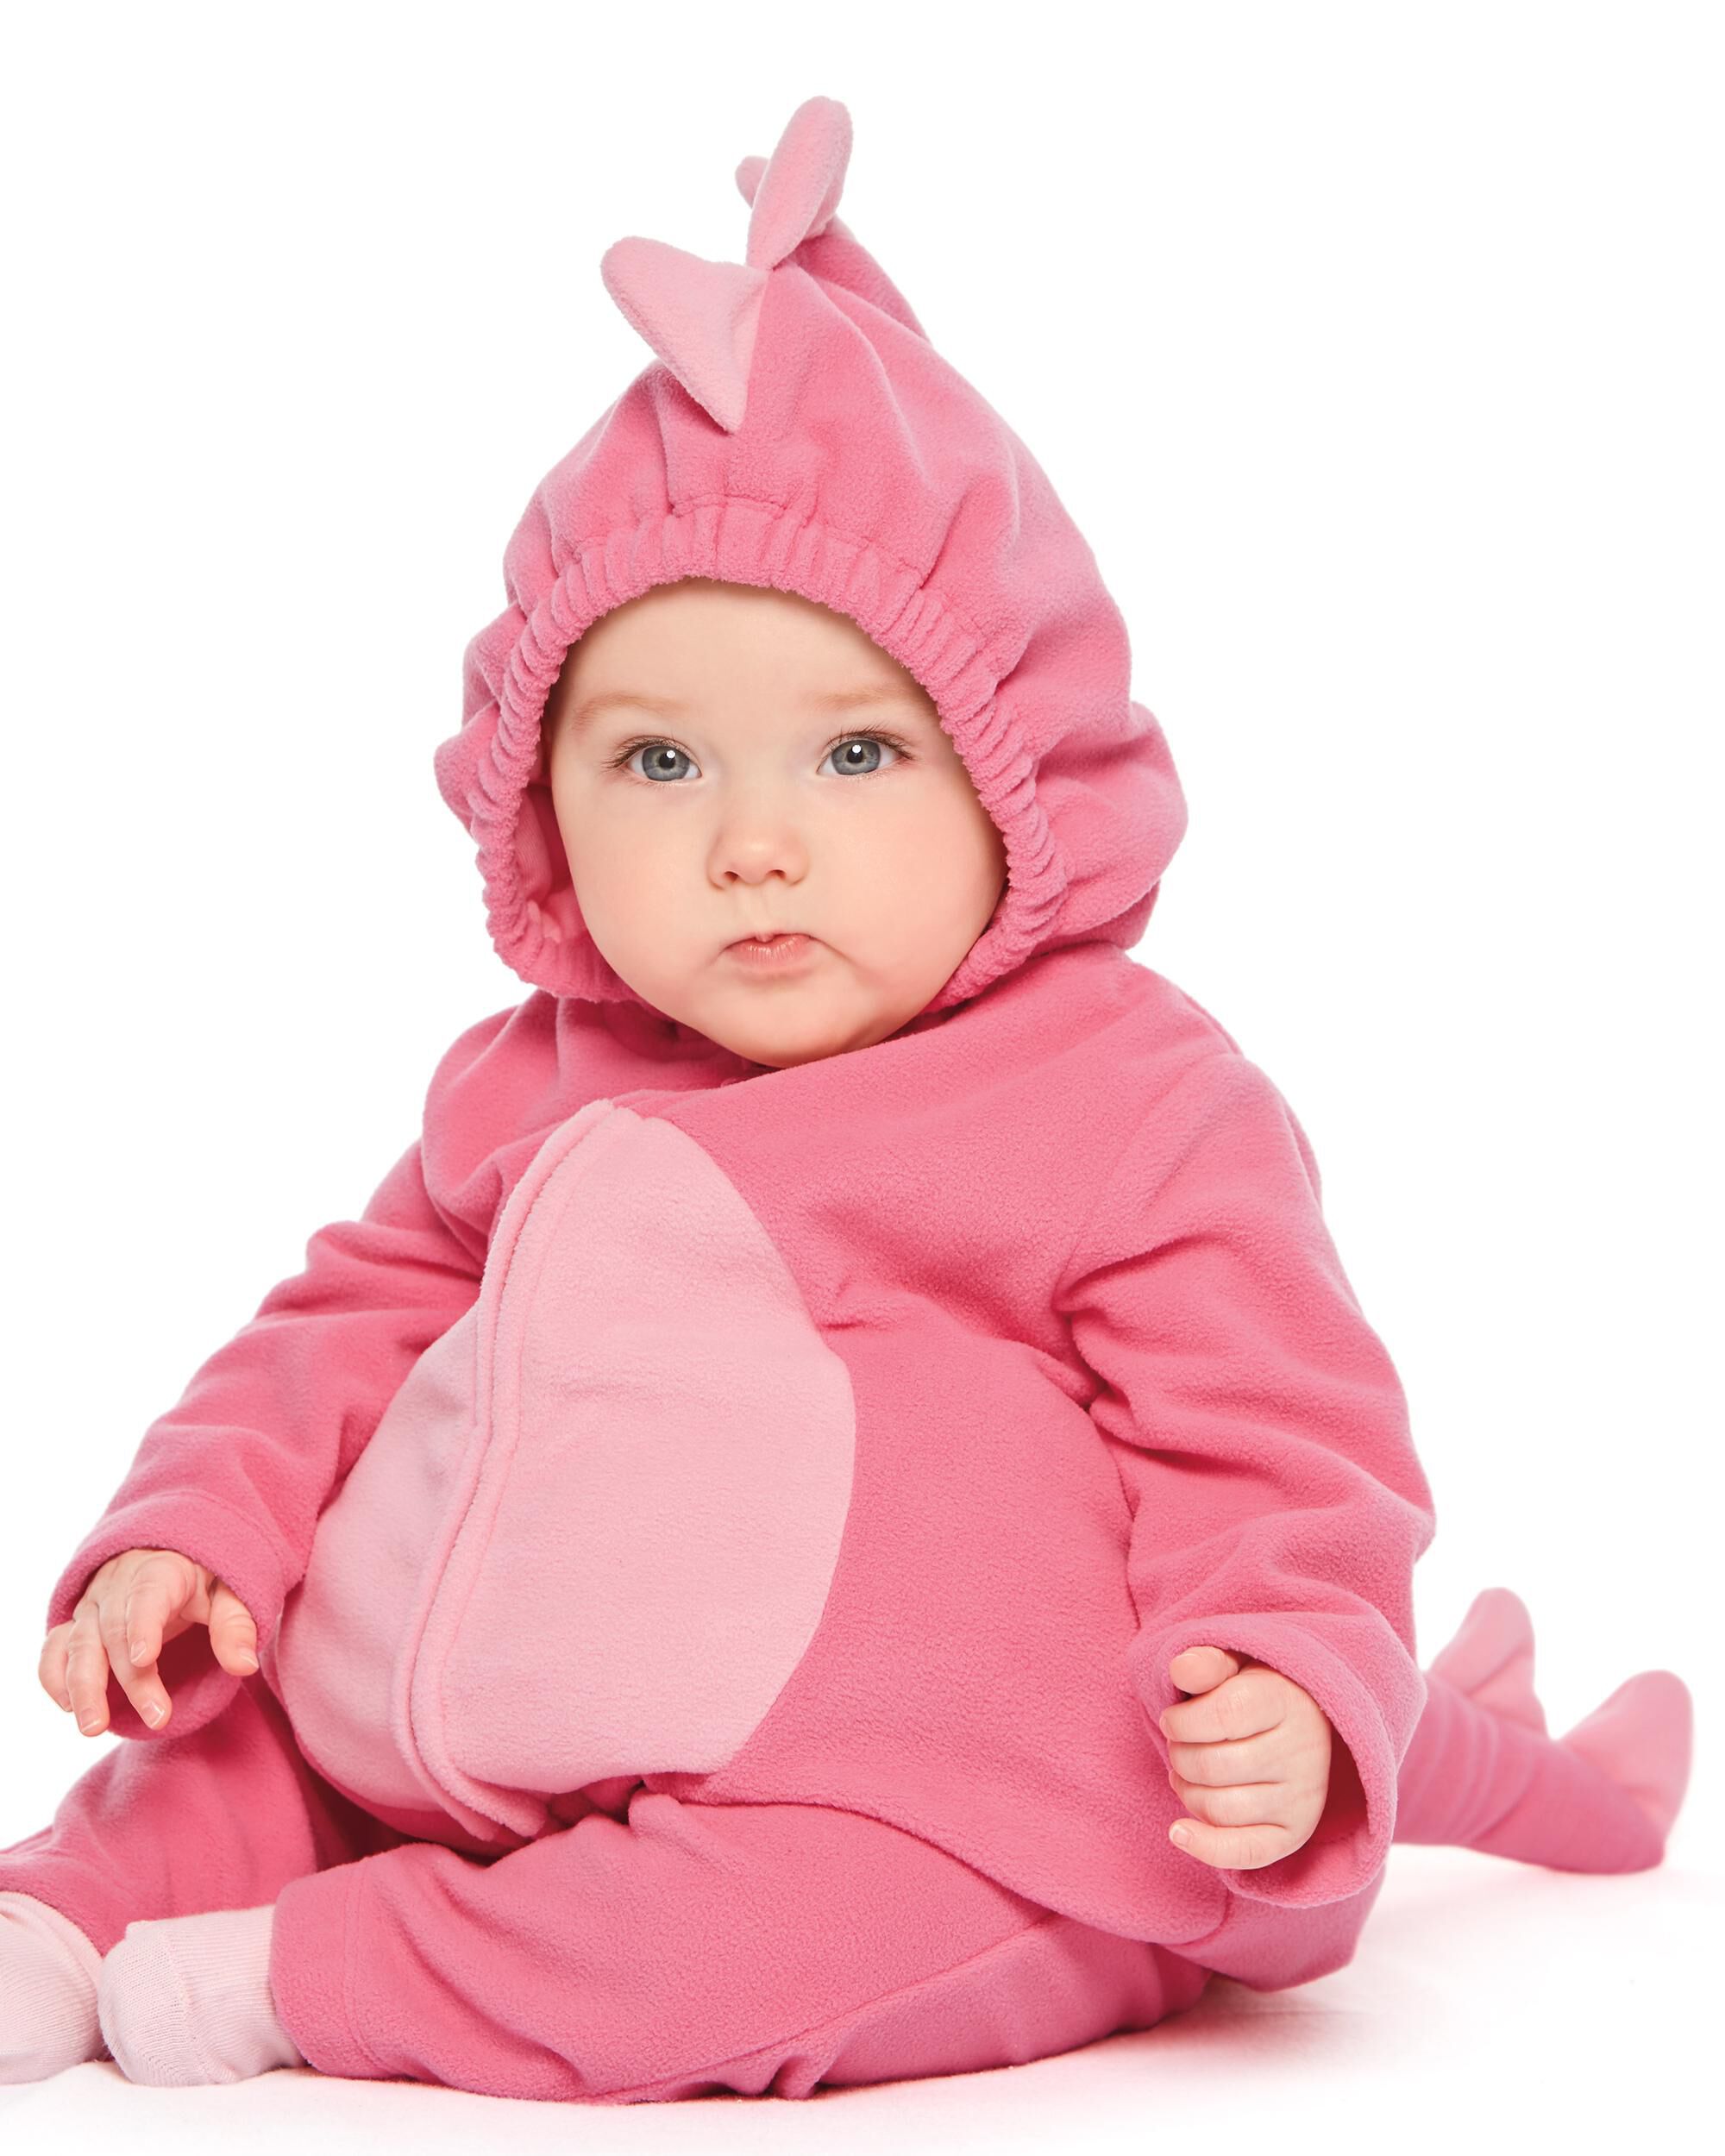 pink dinosaur baby clothes